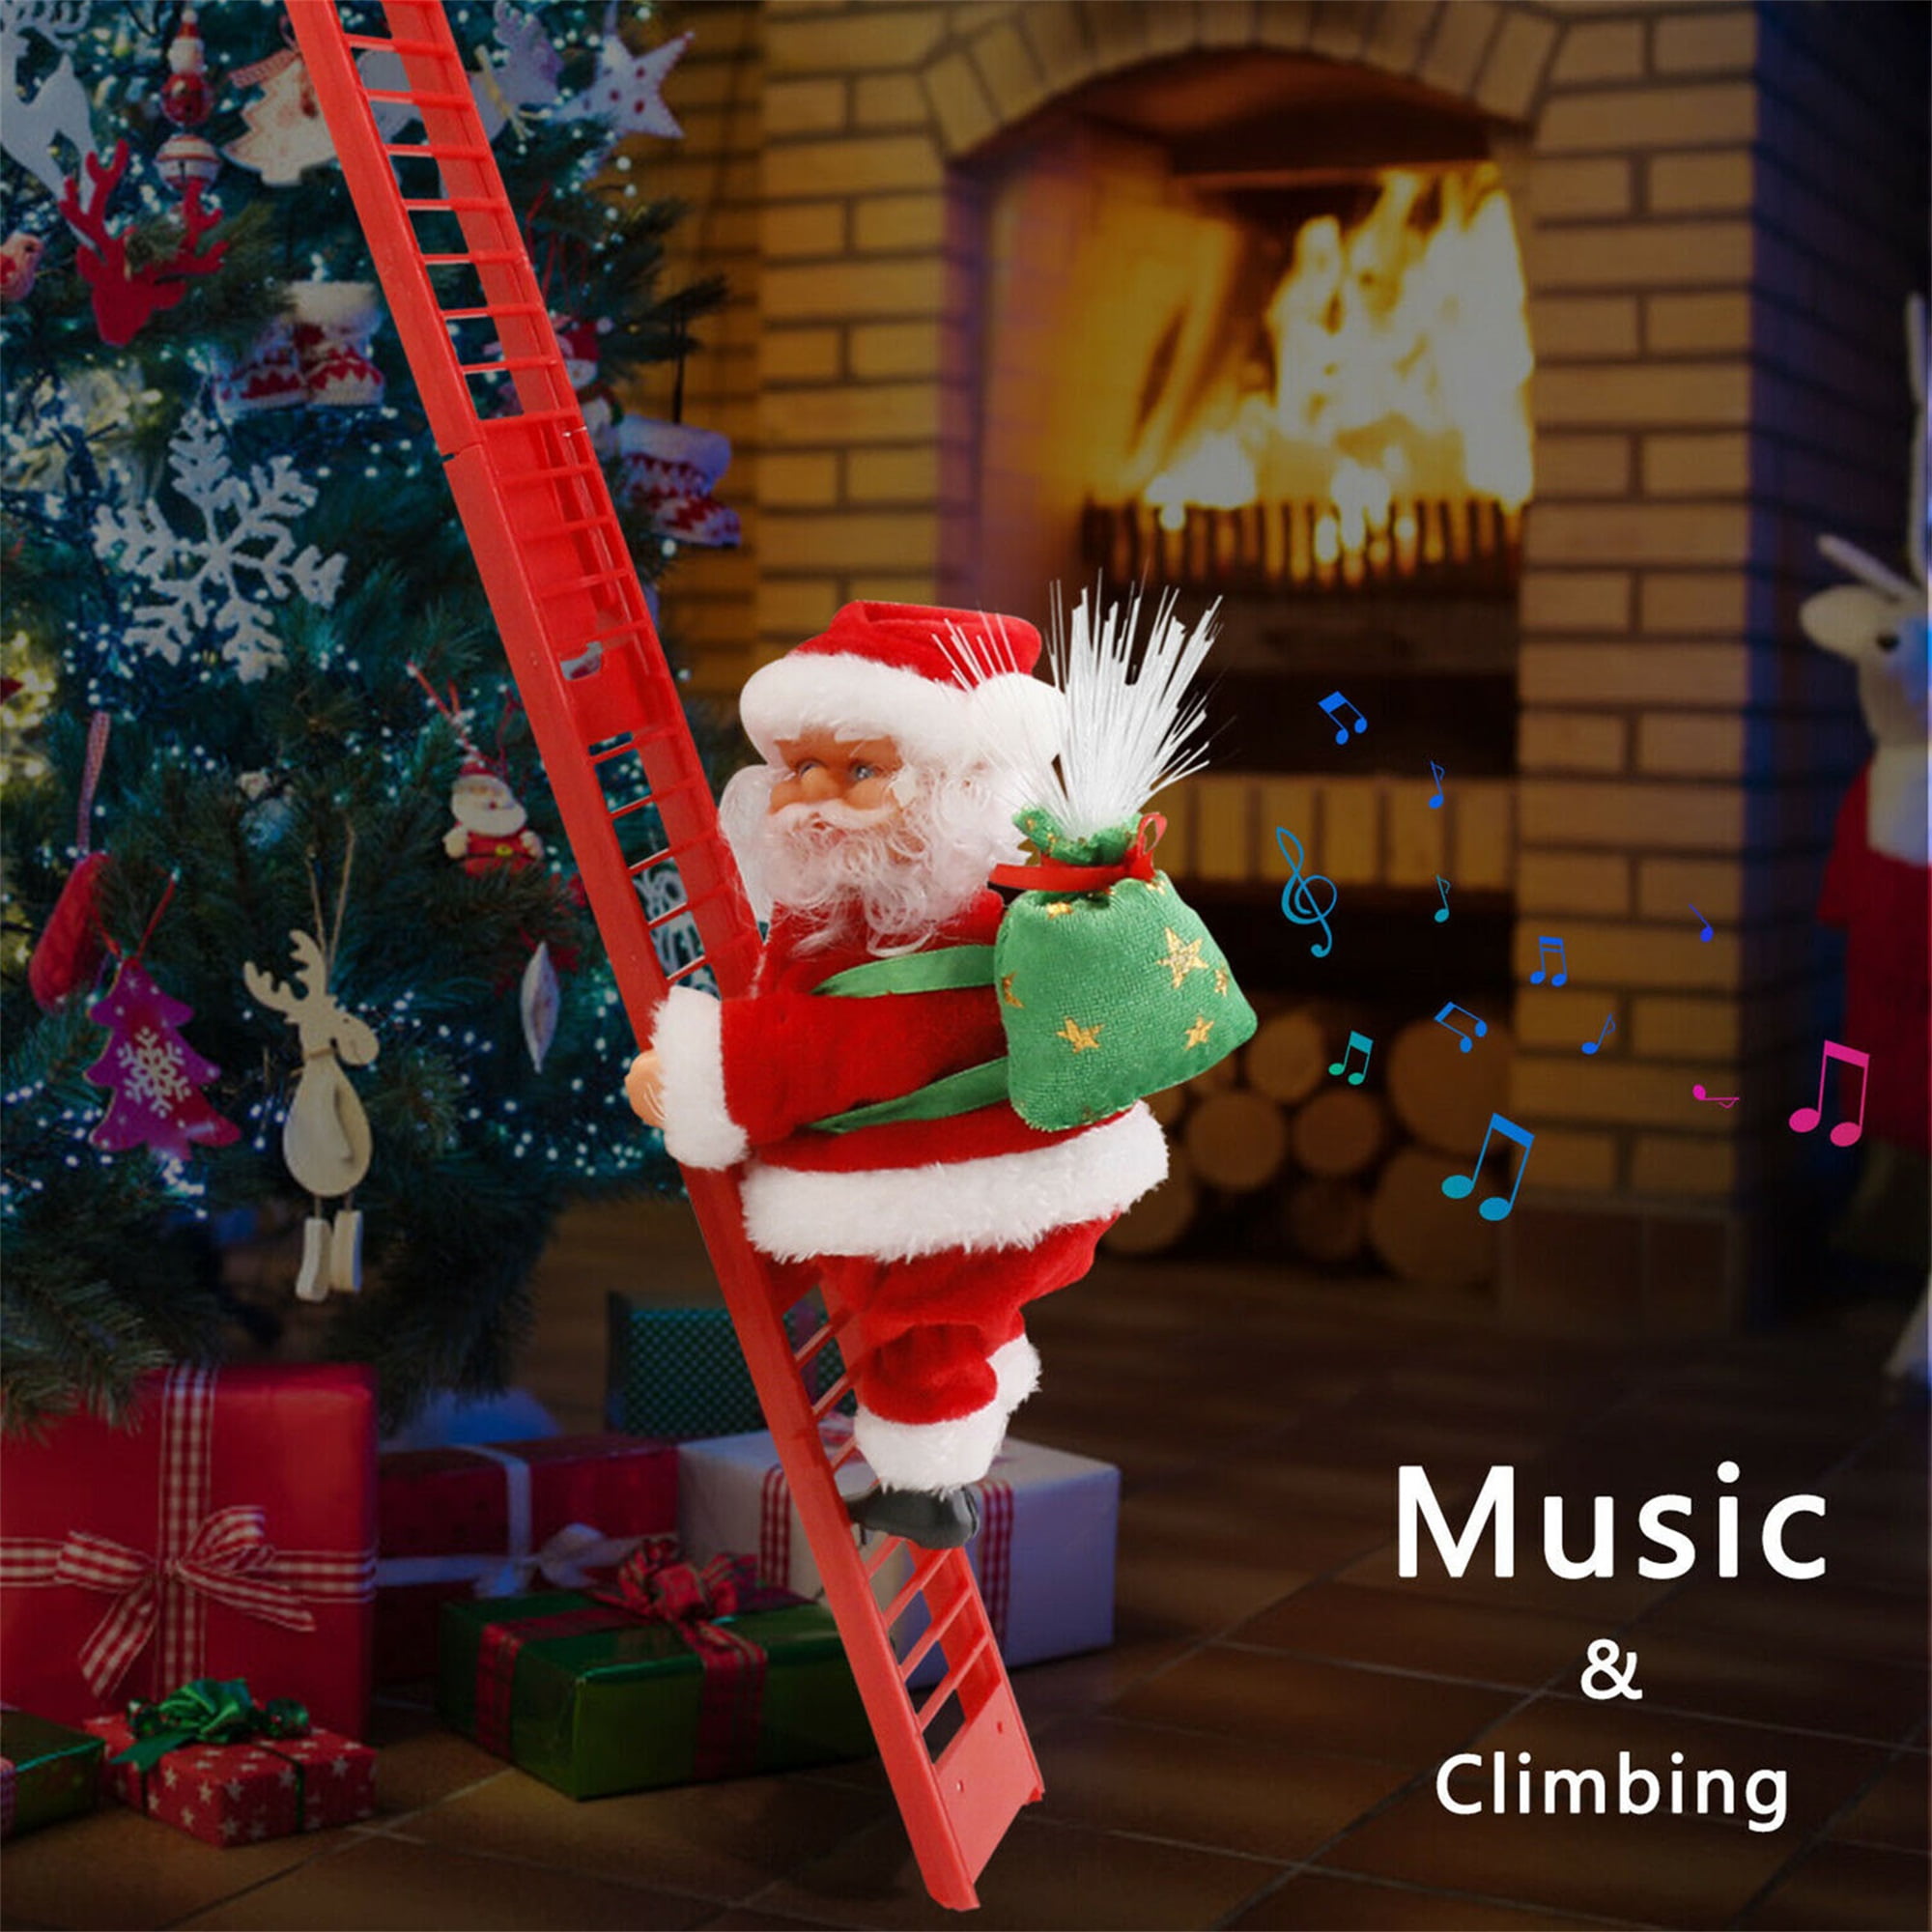 Details about   Animated Musical Santa Claus Climbing Ladder Up Electric Toy Christmas Decor 